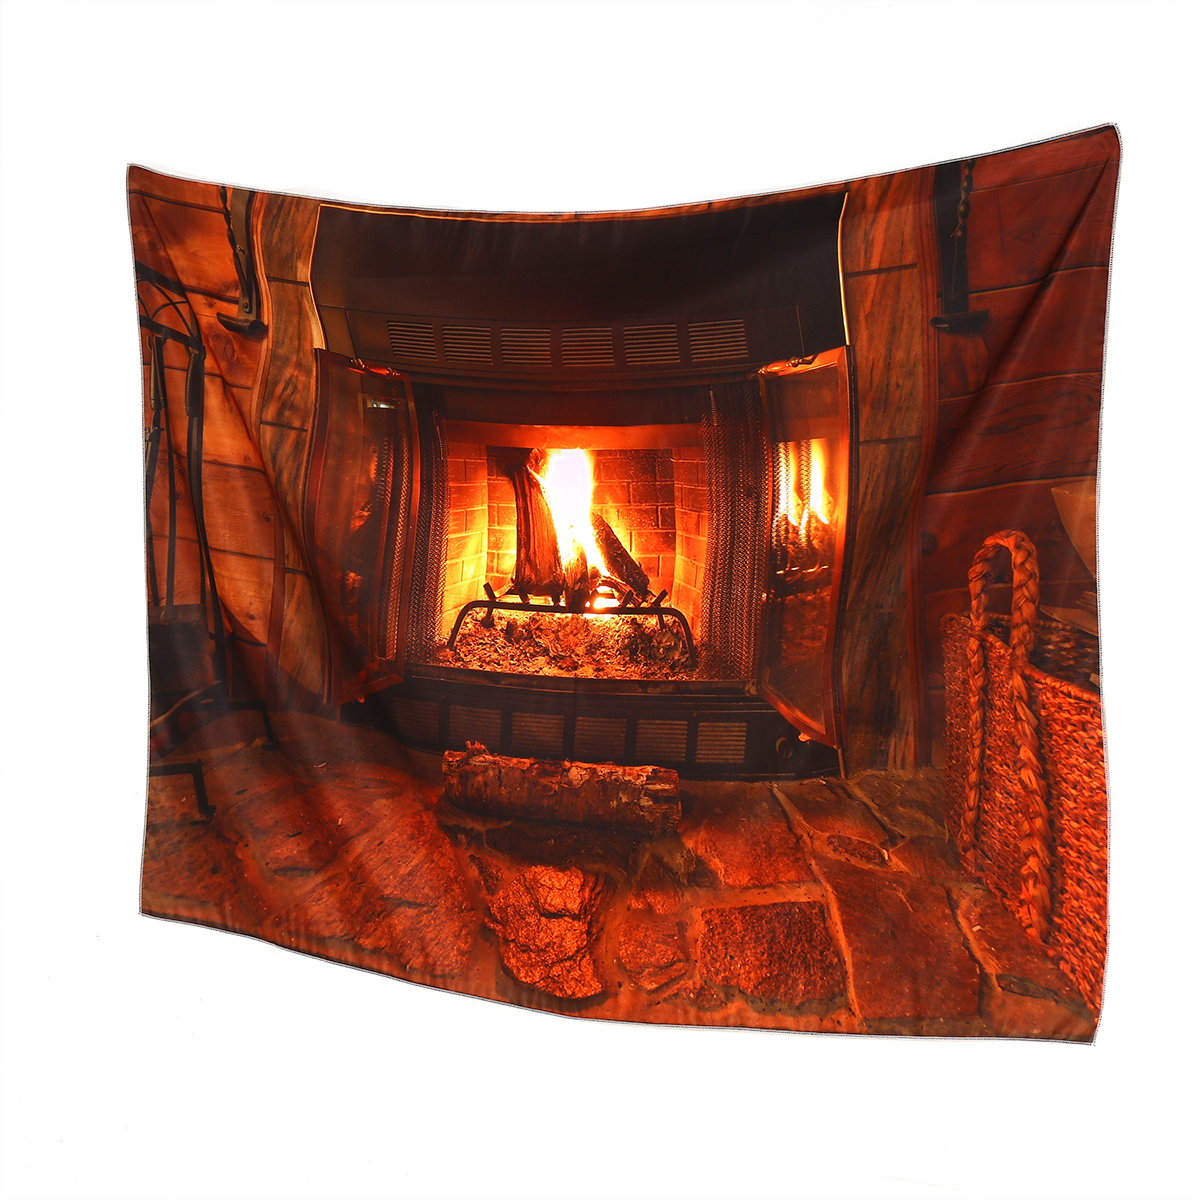 Polyester-Wall-Hanging-Tapestry-Art-Home-Decor-Fireplace-Pattern-Blankets-For-Home-Bedroom-Porch-Han-1636374-3